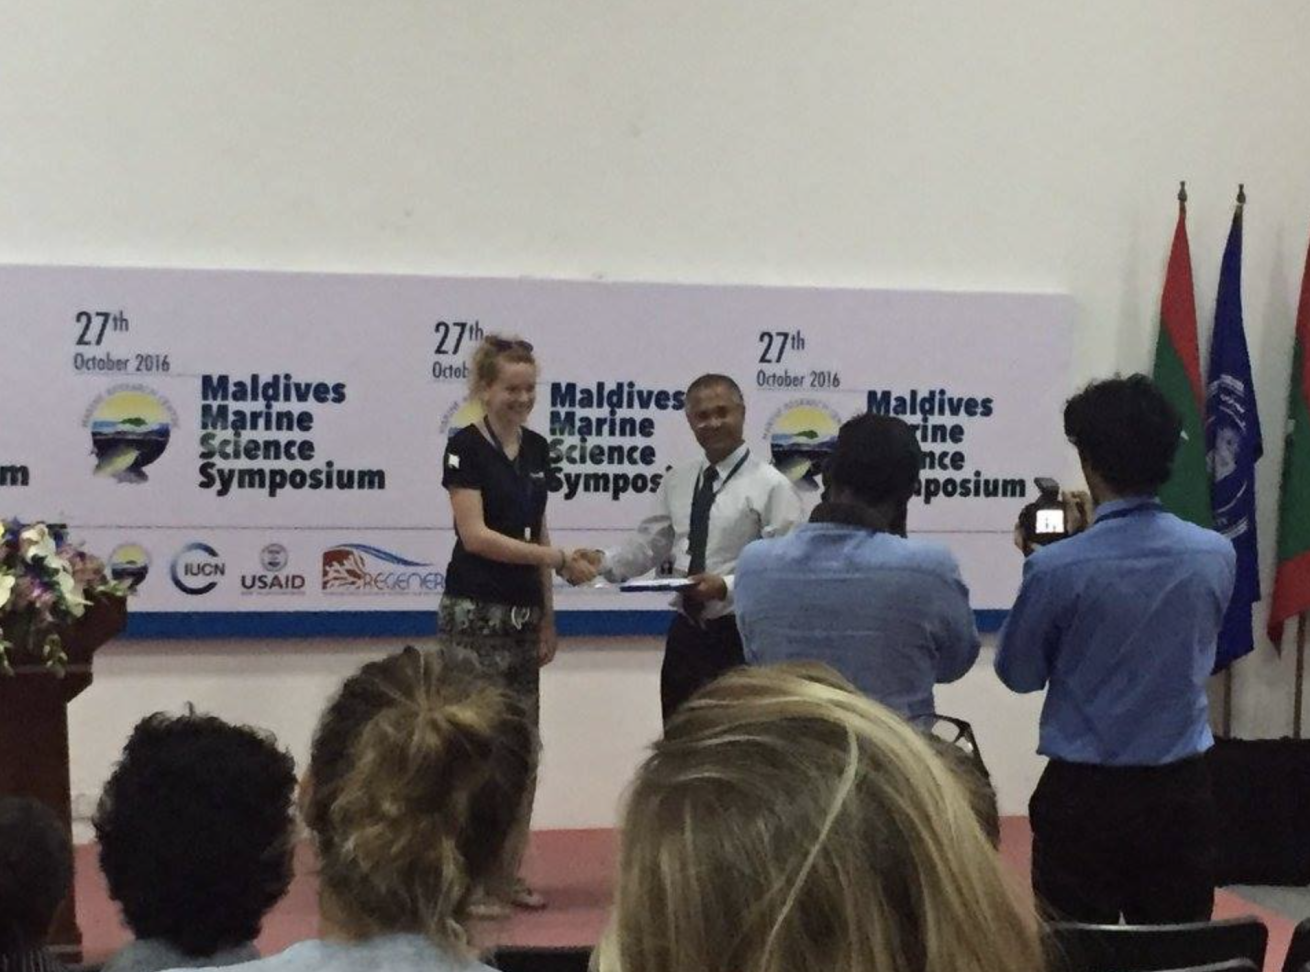 Dr. Annie Murray presenting her PhD research on manta foraging flexibility at the First Maldives Science Symposium in Male (2016).